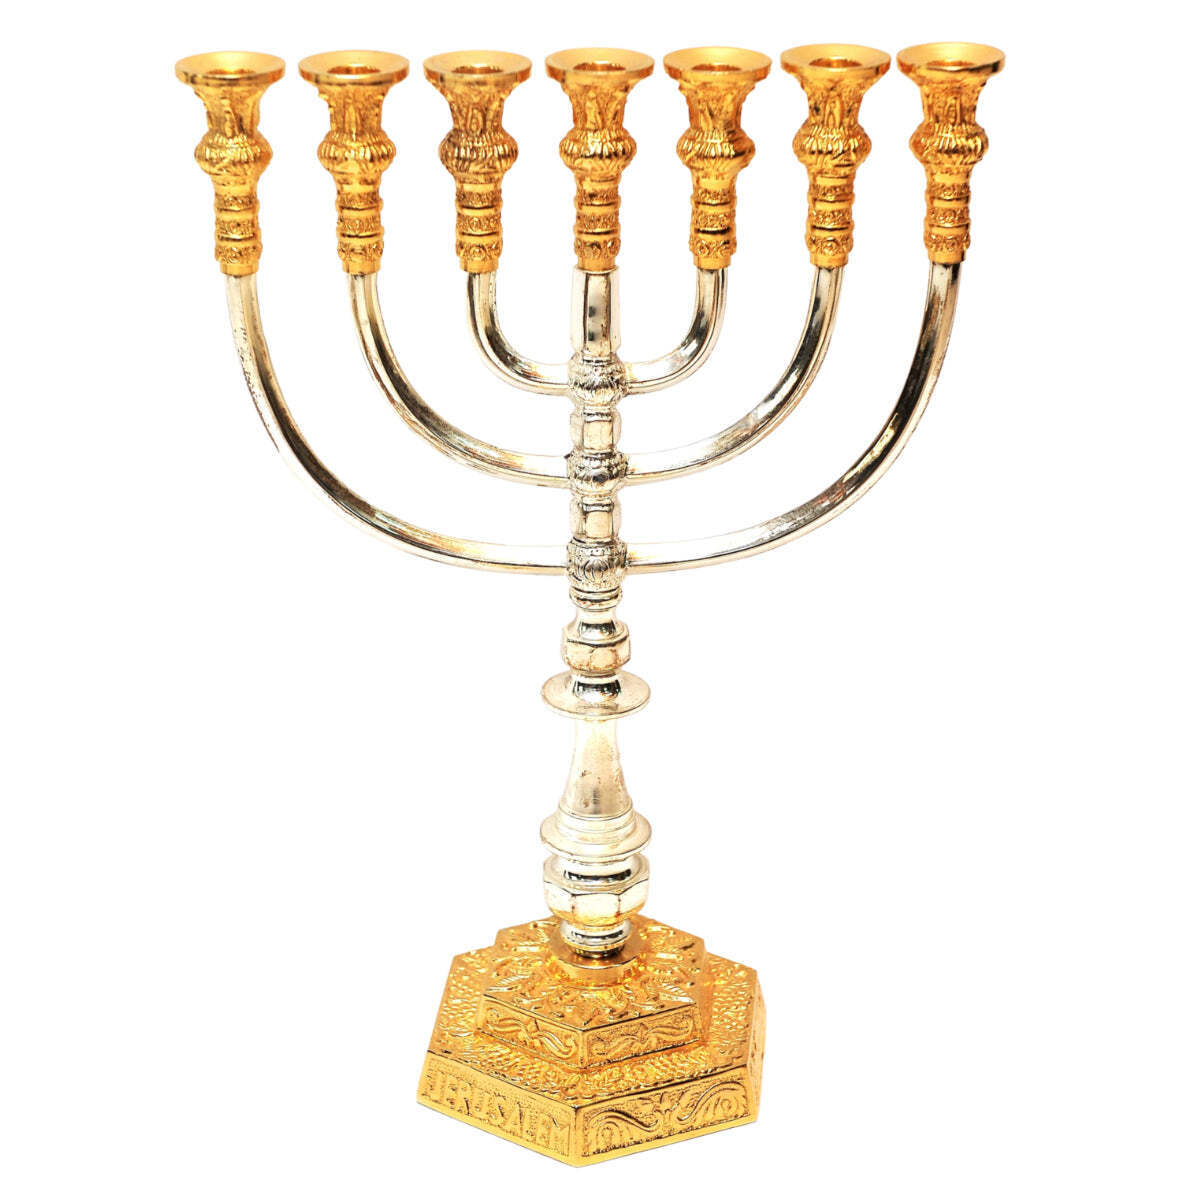 Authentic Temple Menorah Gold & Silver Plated Candle Holder 14.2″ / 36cm